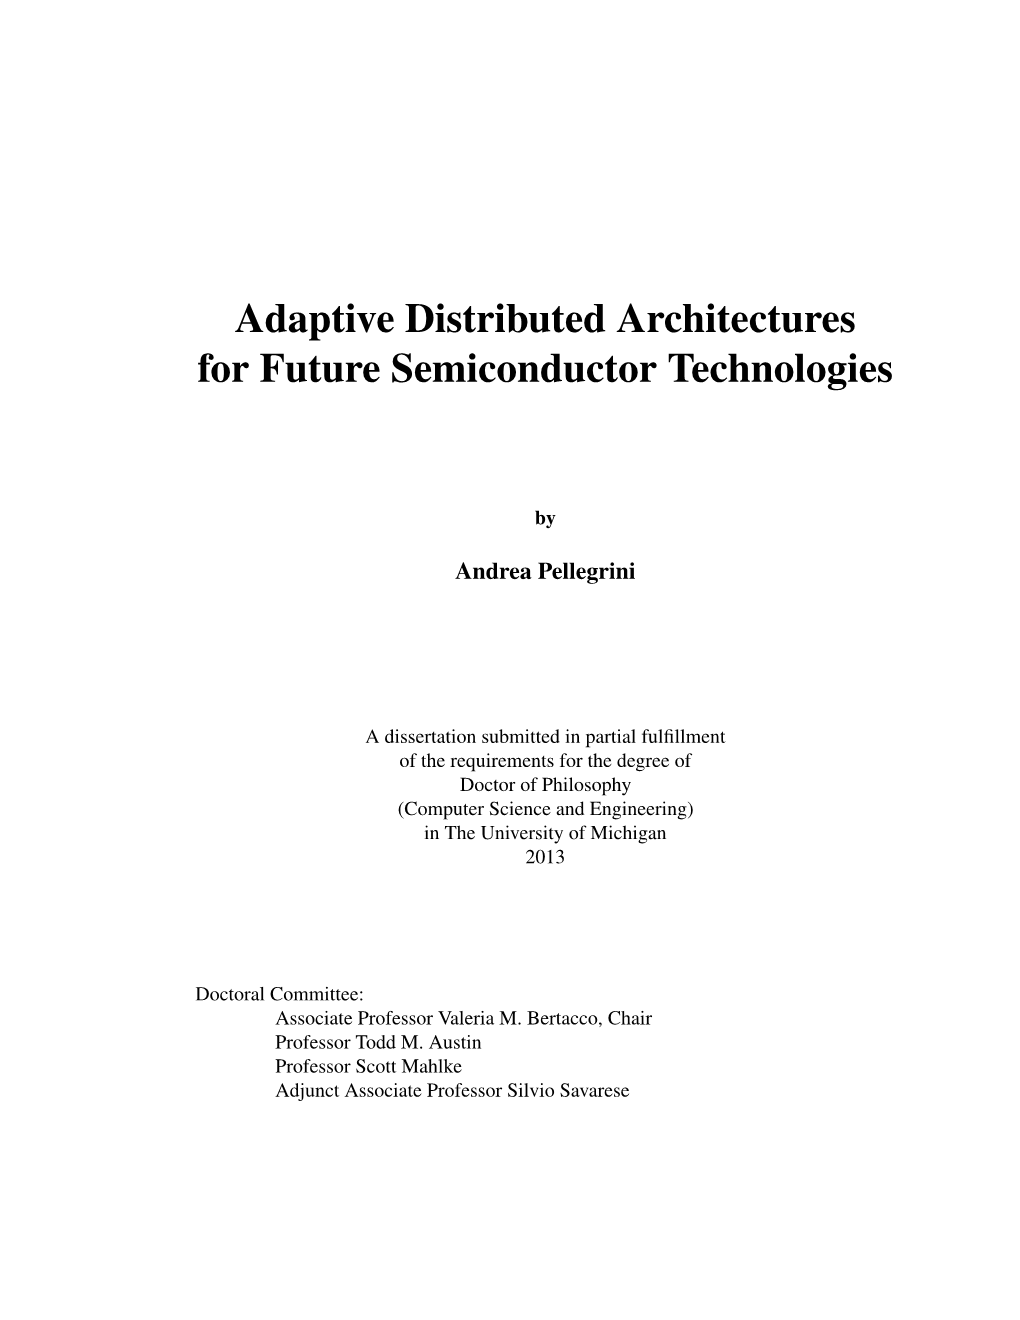 Adaptive Distributed Architectures for Future Semiconductor Technologies